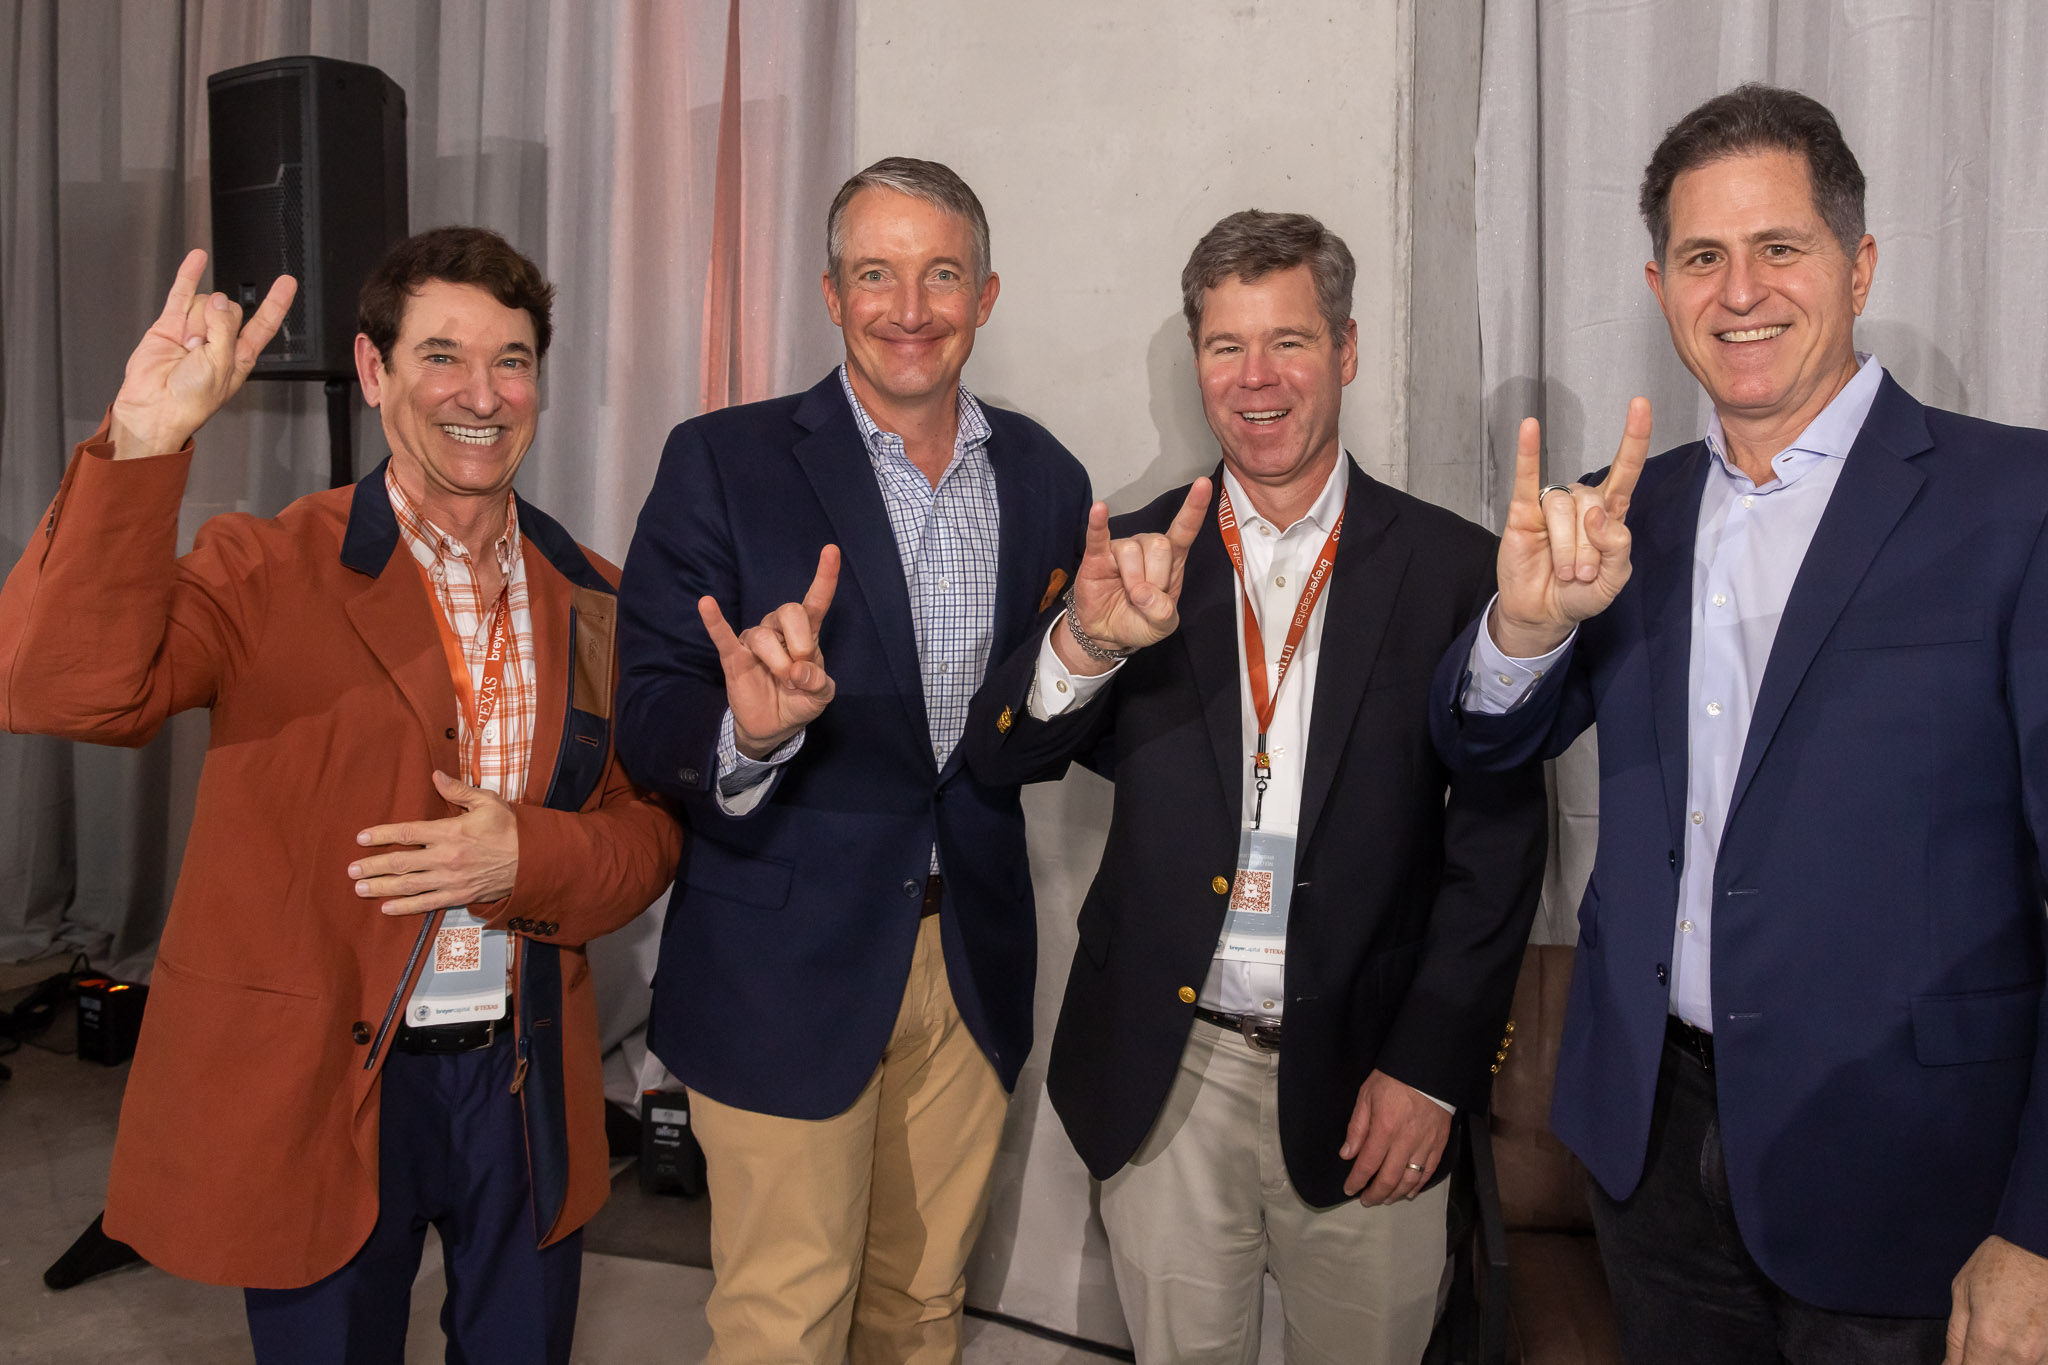 Jim Breyer, Jay Hartzell, Patrick Pace and Michael Dell